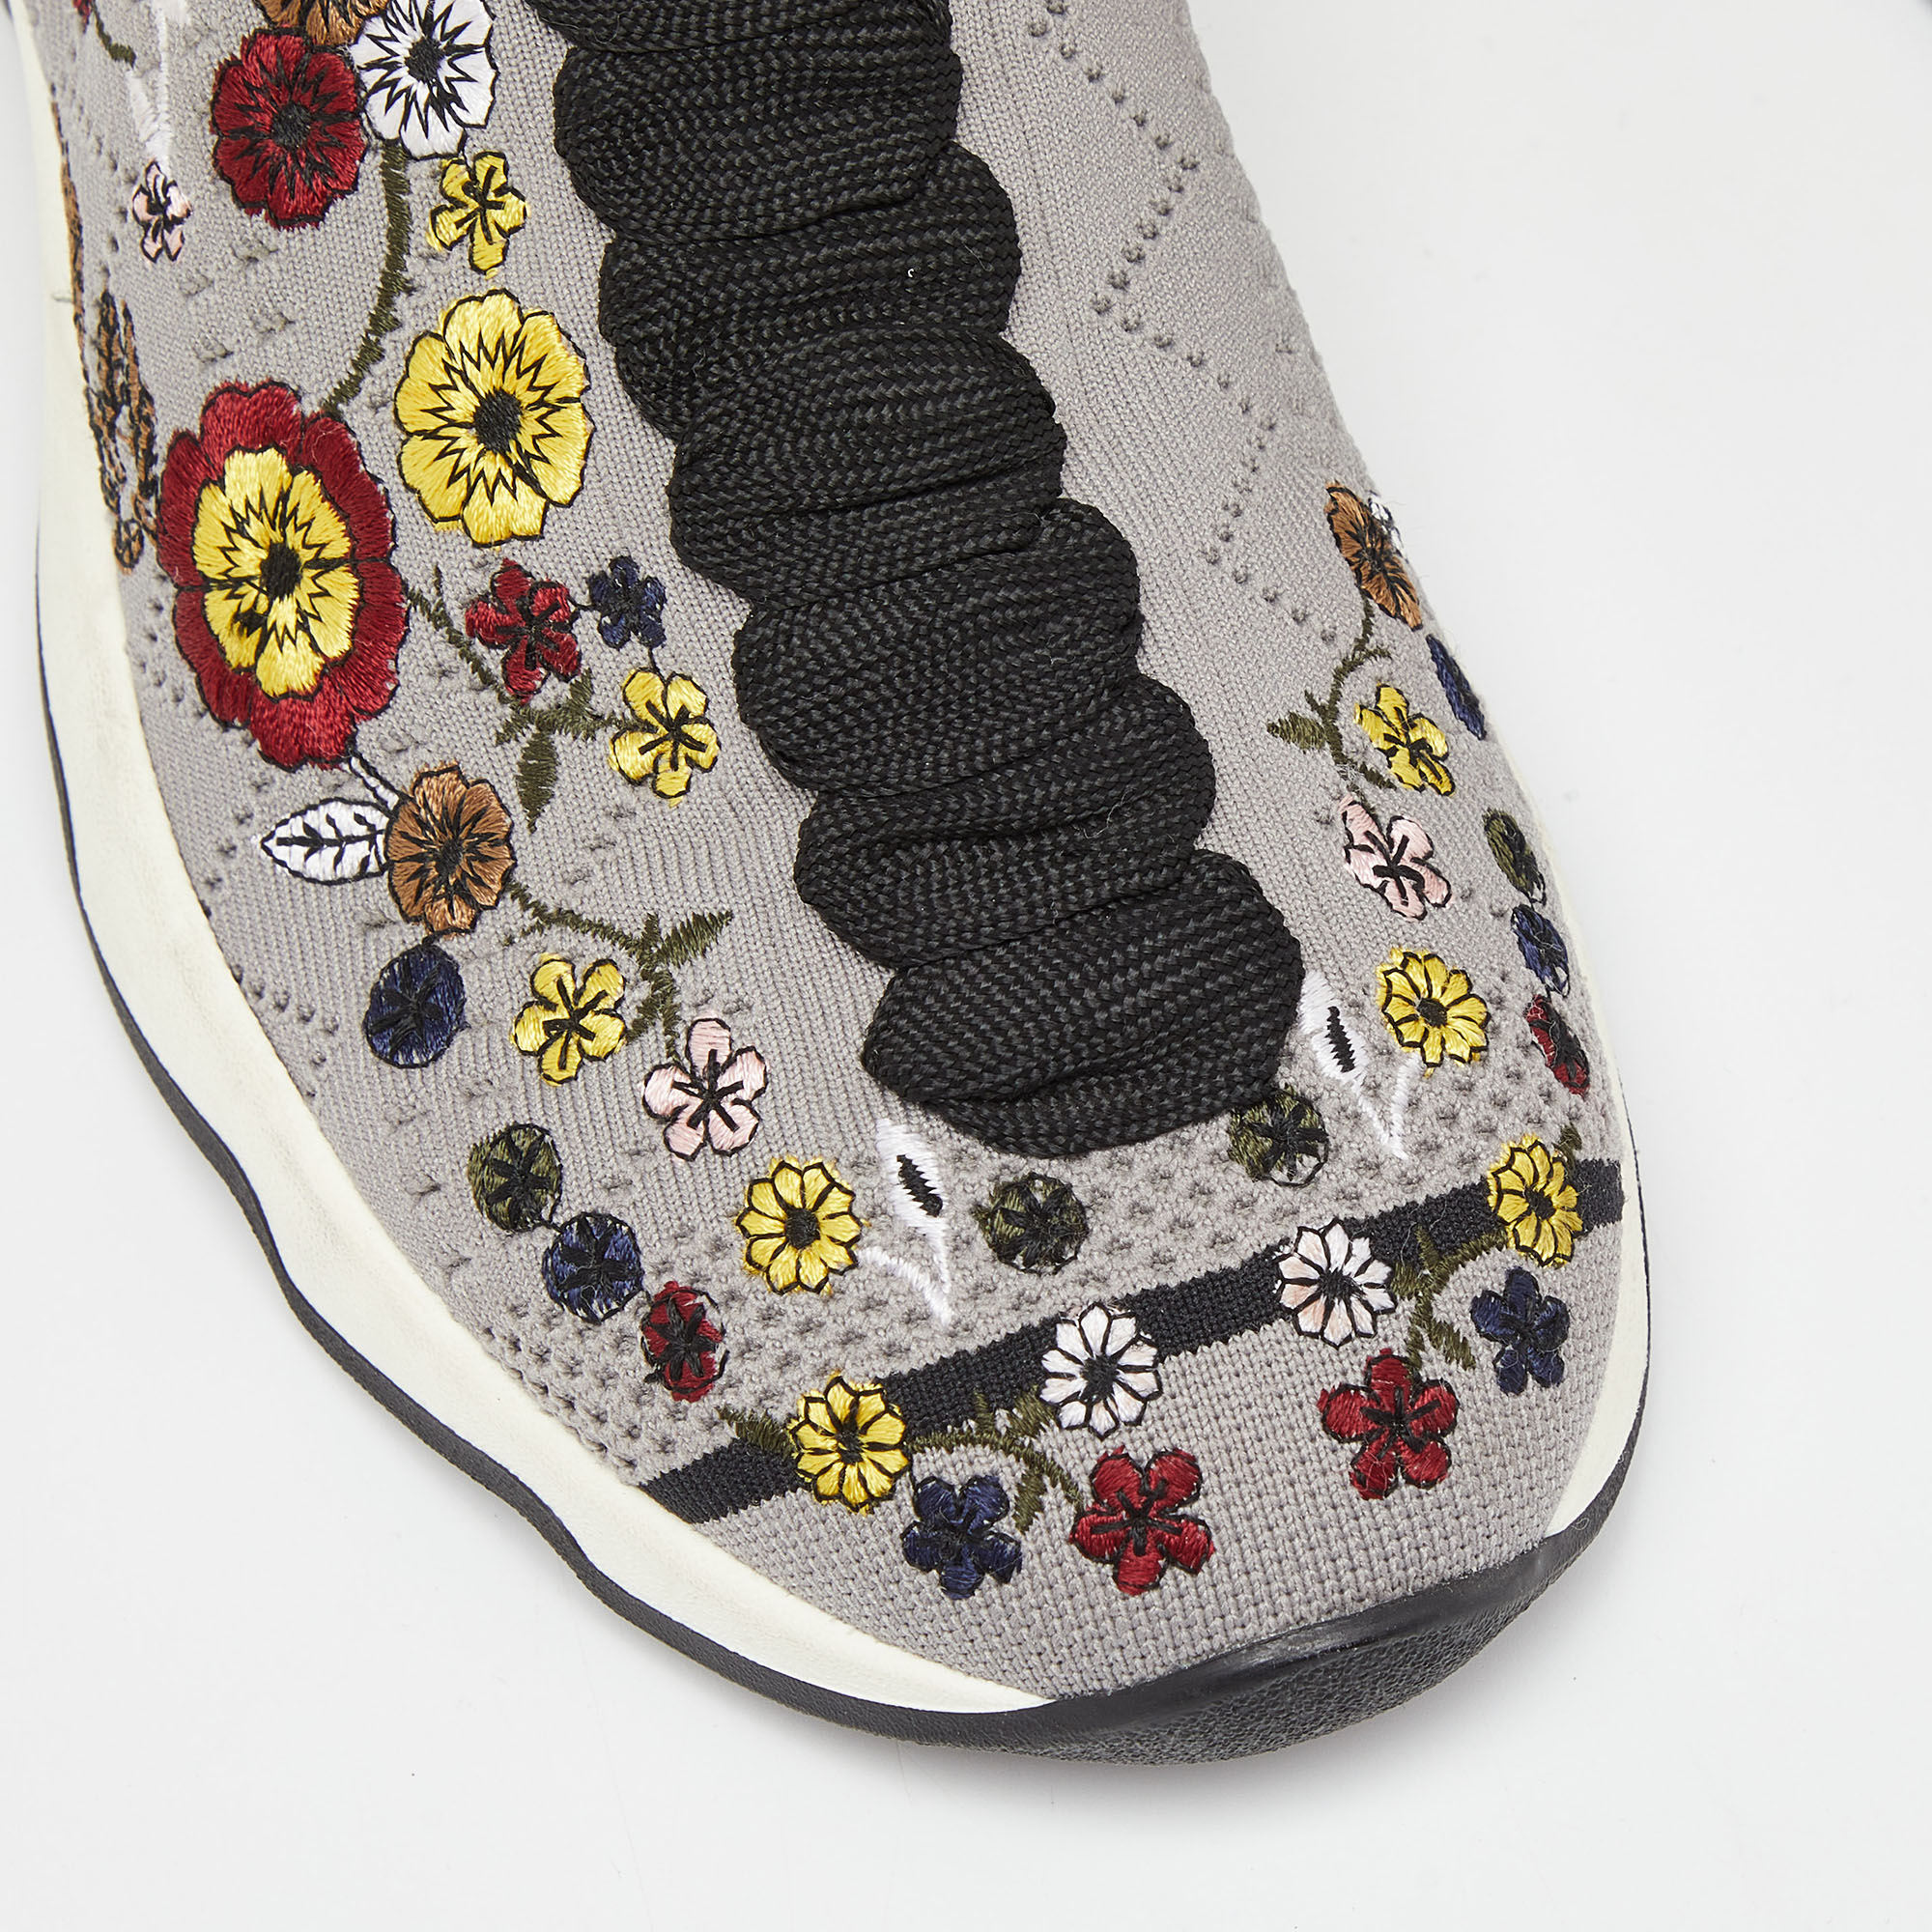 Fendi Grey Floral Embroidered Knit Fabric Slip On Sneakers Size 36